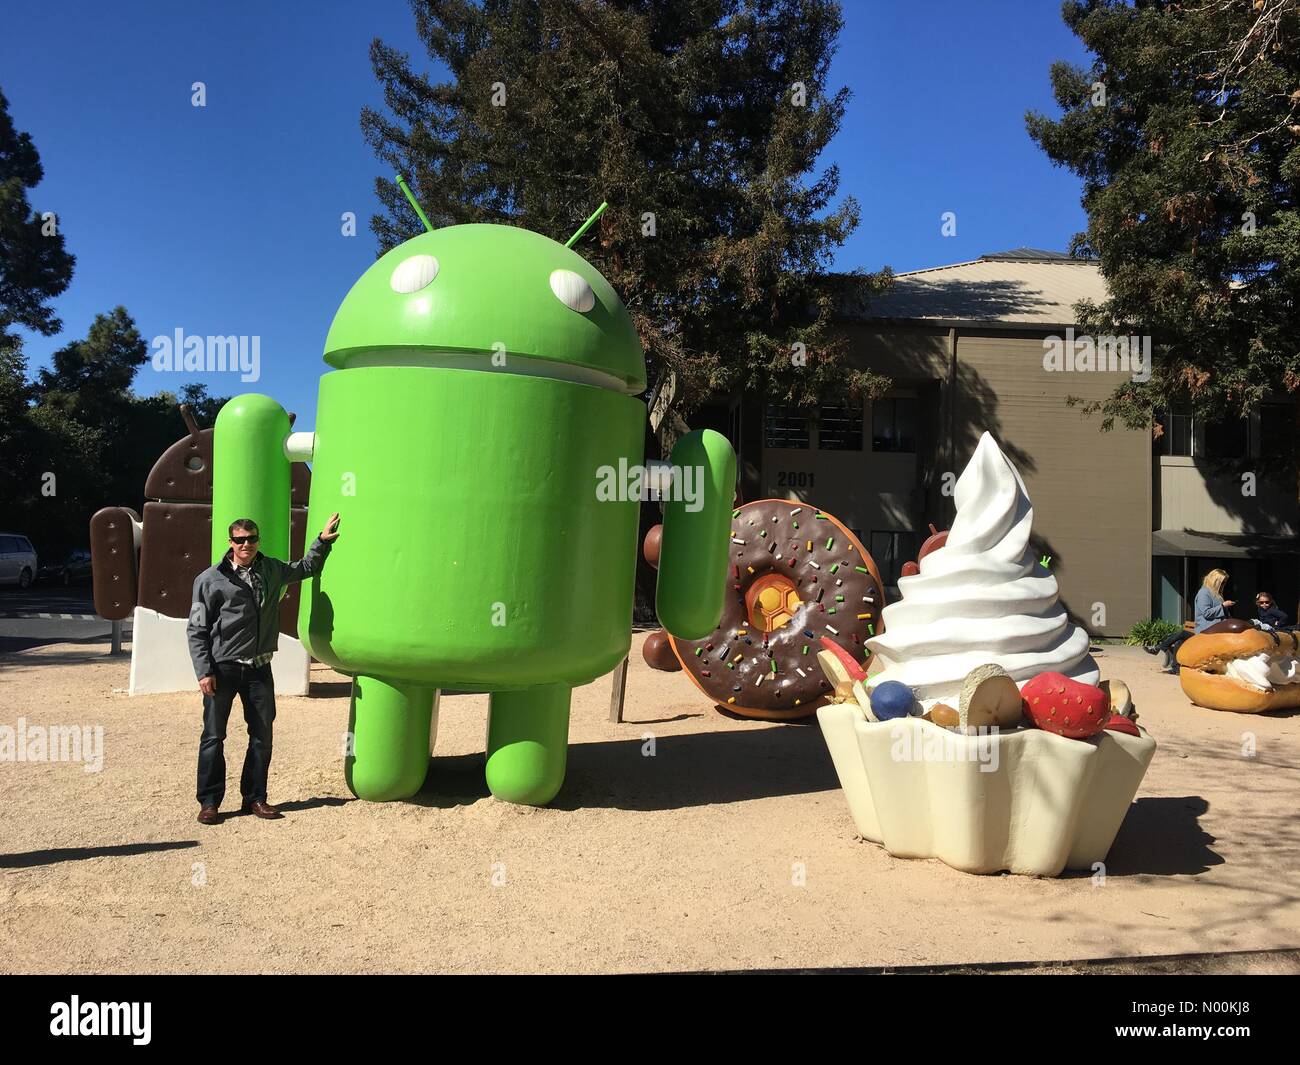 Mountain View, USA. 21st Feb, 2017. Visiting the Google campus. Android versions are represented as statues in a playground on campus, Mountain View, California, USA. Credit: Mike Kahn/Green Stock Media (Agent)/StockimoNews/Alamy Live News Stock Photo